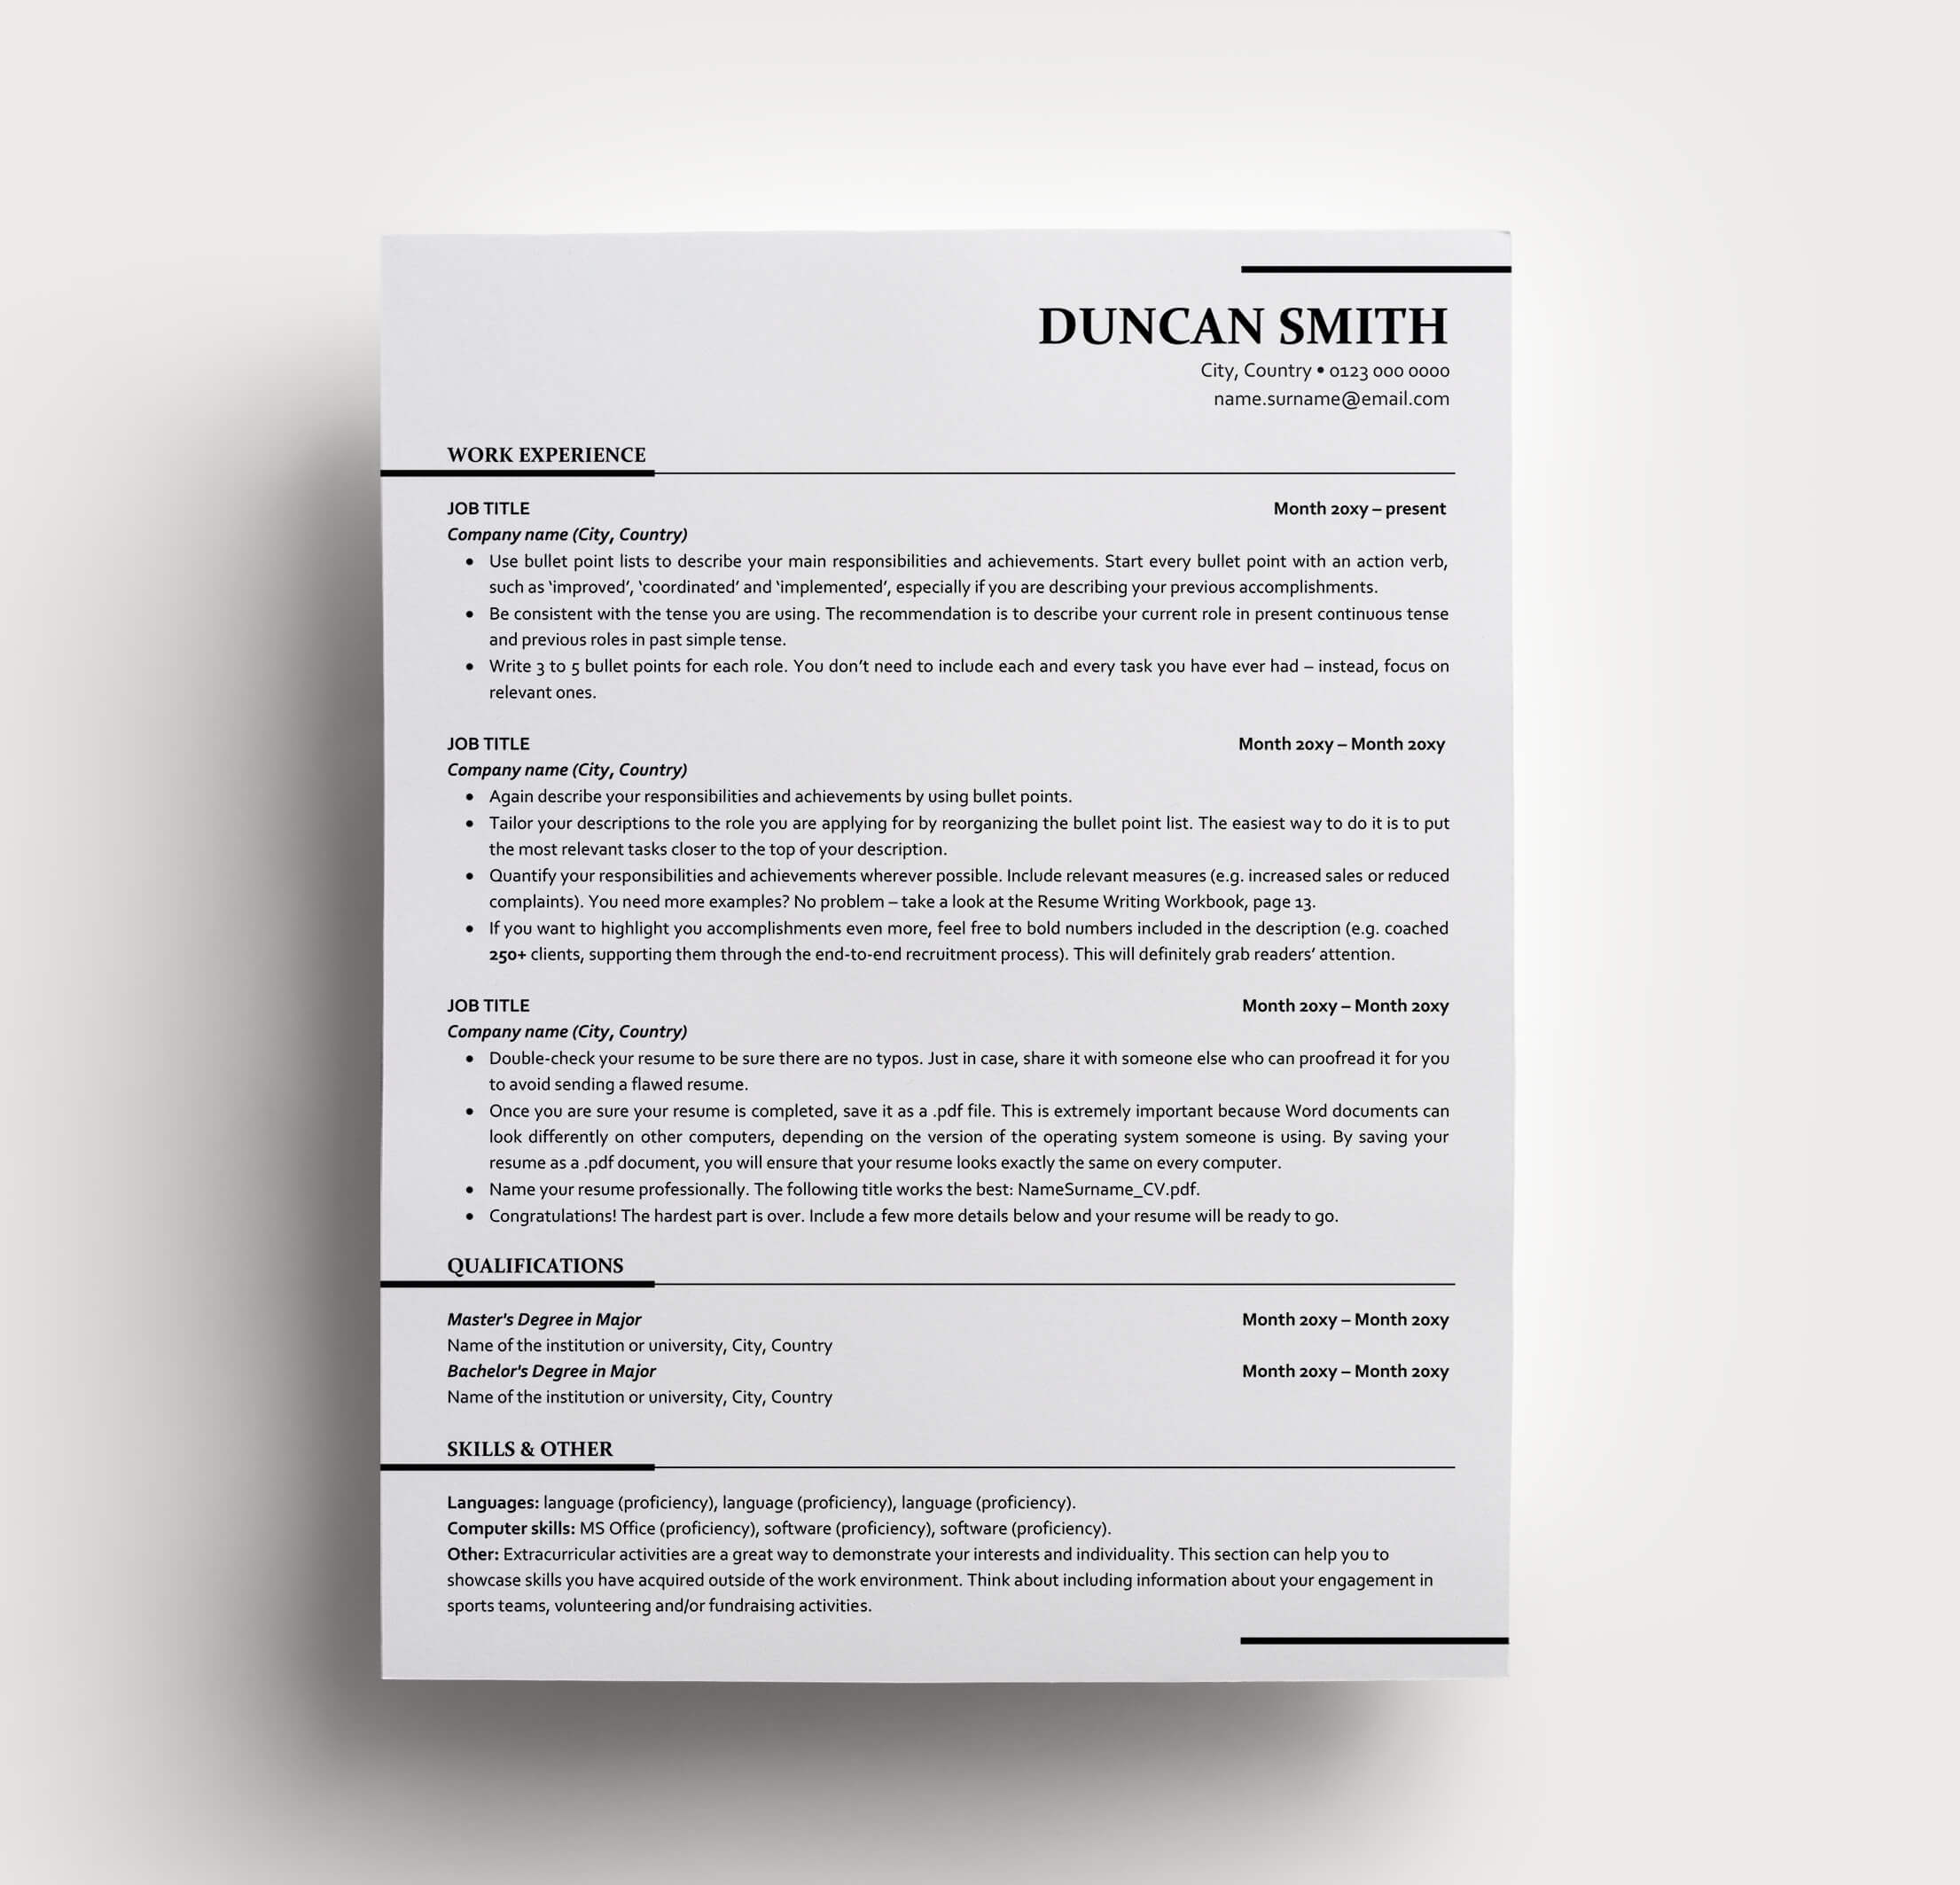 Resume Duncan In Ats Friendly Resume Template